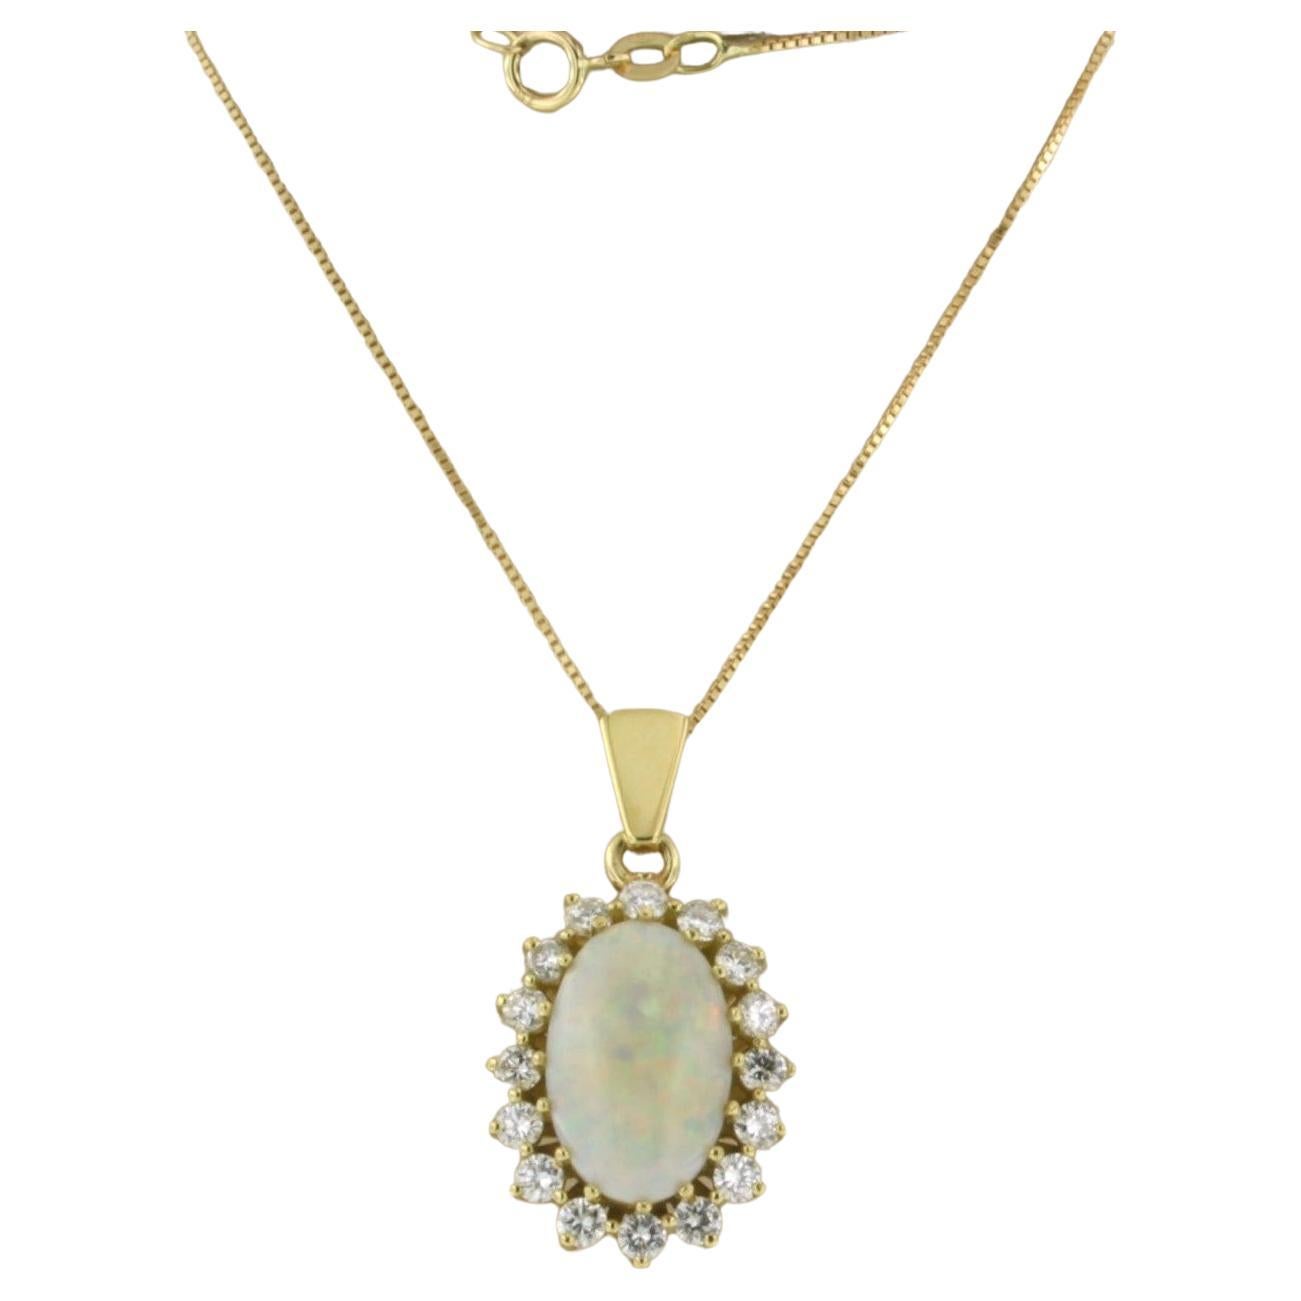 Necklace and pendant set with opald and diamonds 18k yellow gold